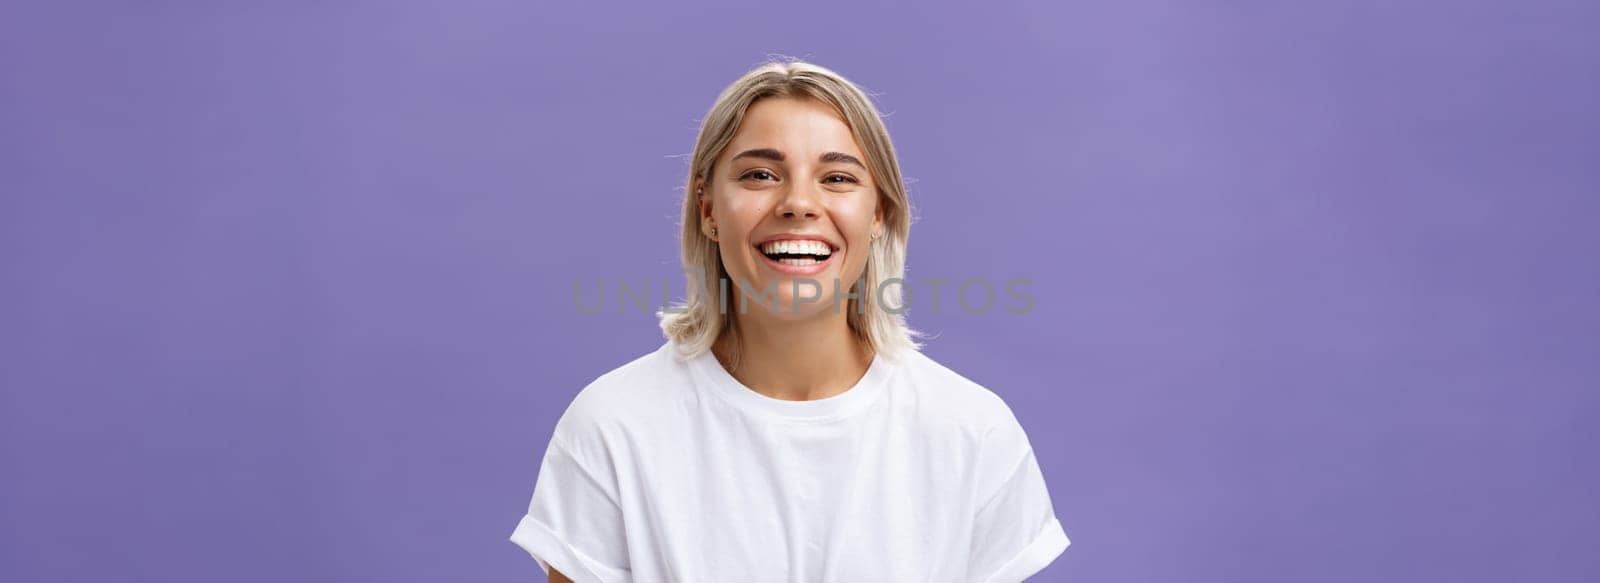 Close-up shot of joyful charming blonde female with delighted and pleased smile standing in white t-shirt over purple background spending time in awesome amusing company. Emotions concept